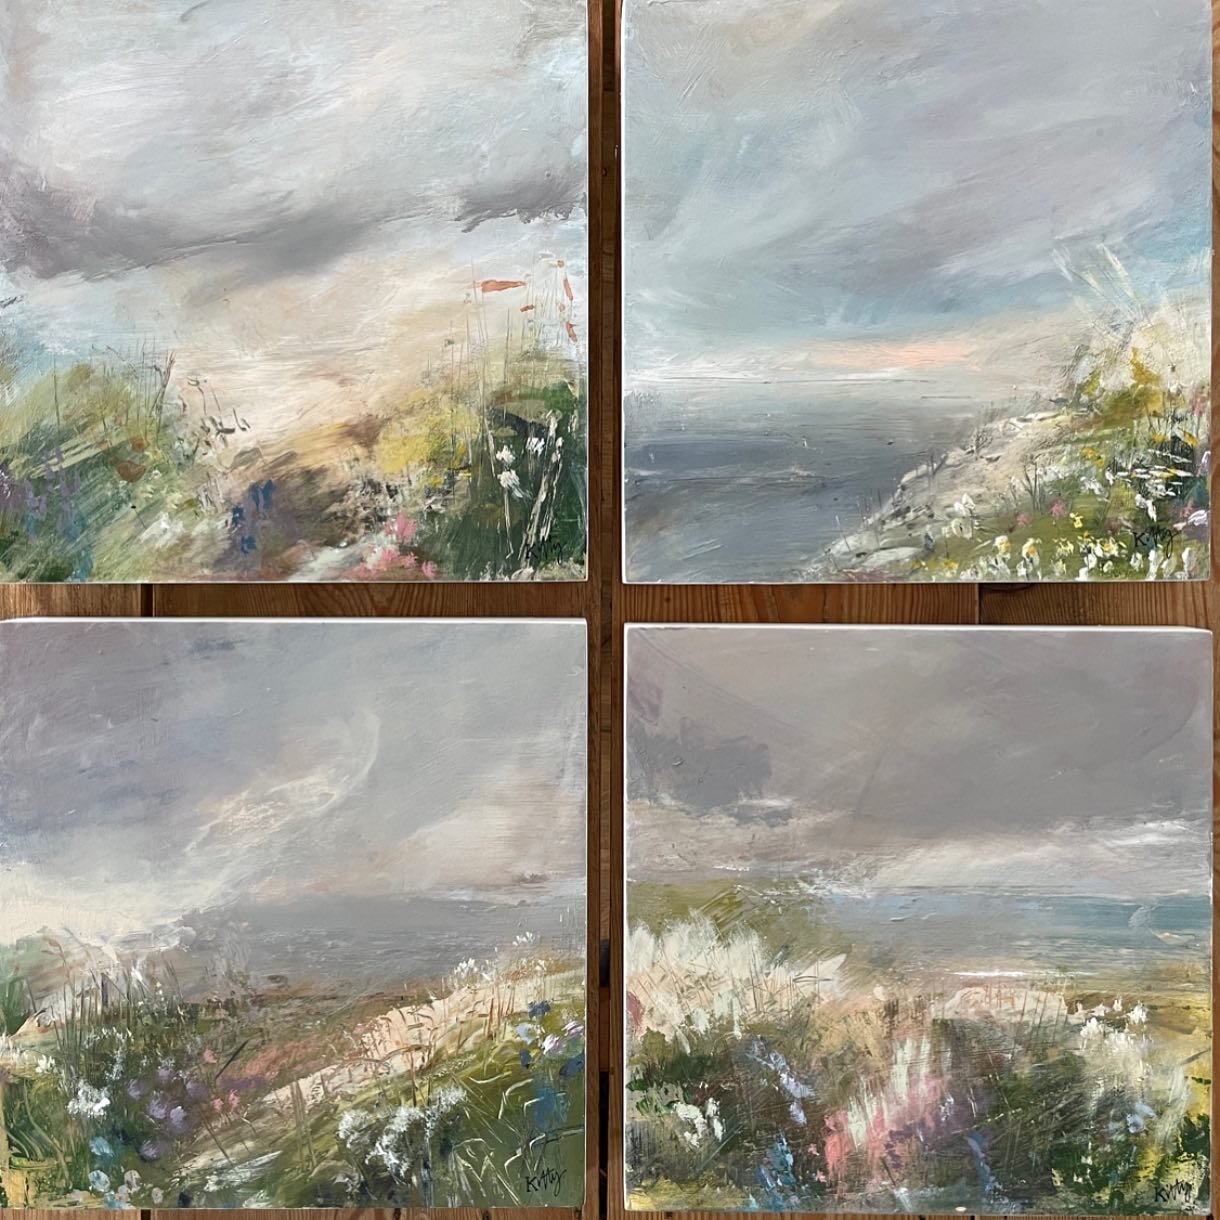 Four brand NEW paintings off to @neptunehove @neptunehomeofficial ready for this Saturdays exhibition! These 30 x 30 cm squares and lots more of my larger canvases will be on display and available to purchase from Saturday.

It would be so lovely to 